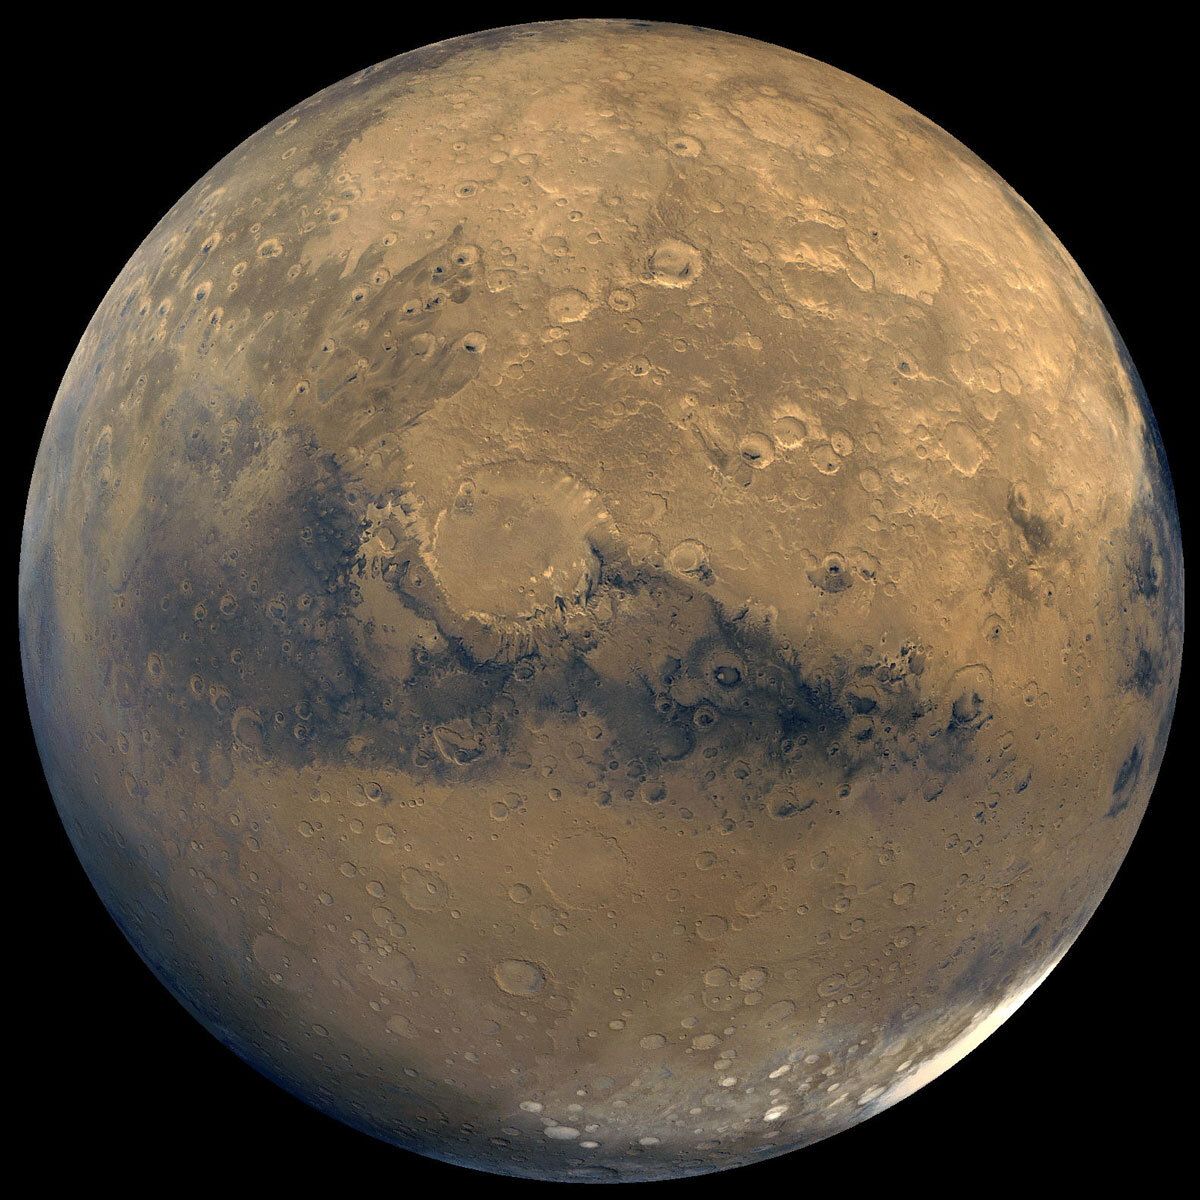 Mars leaks water into space during dust storms and warmer seasons